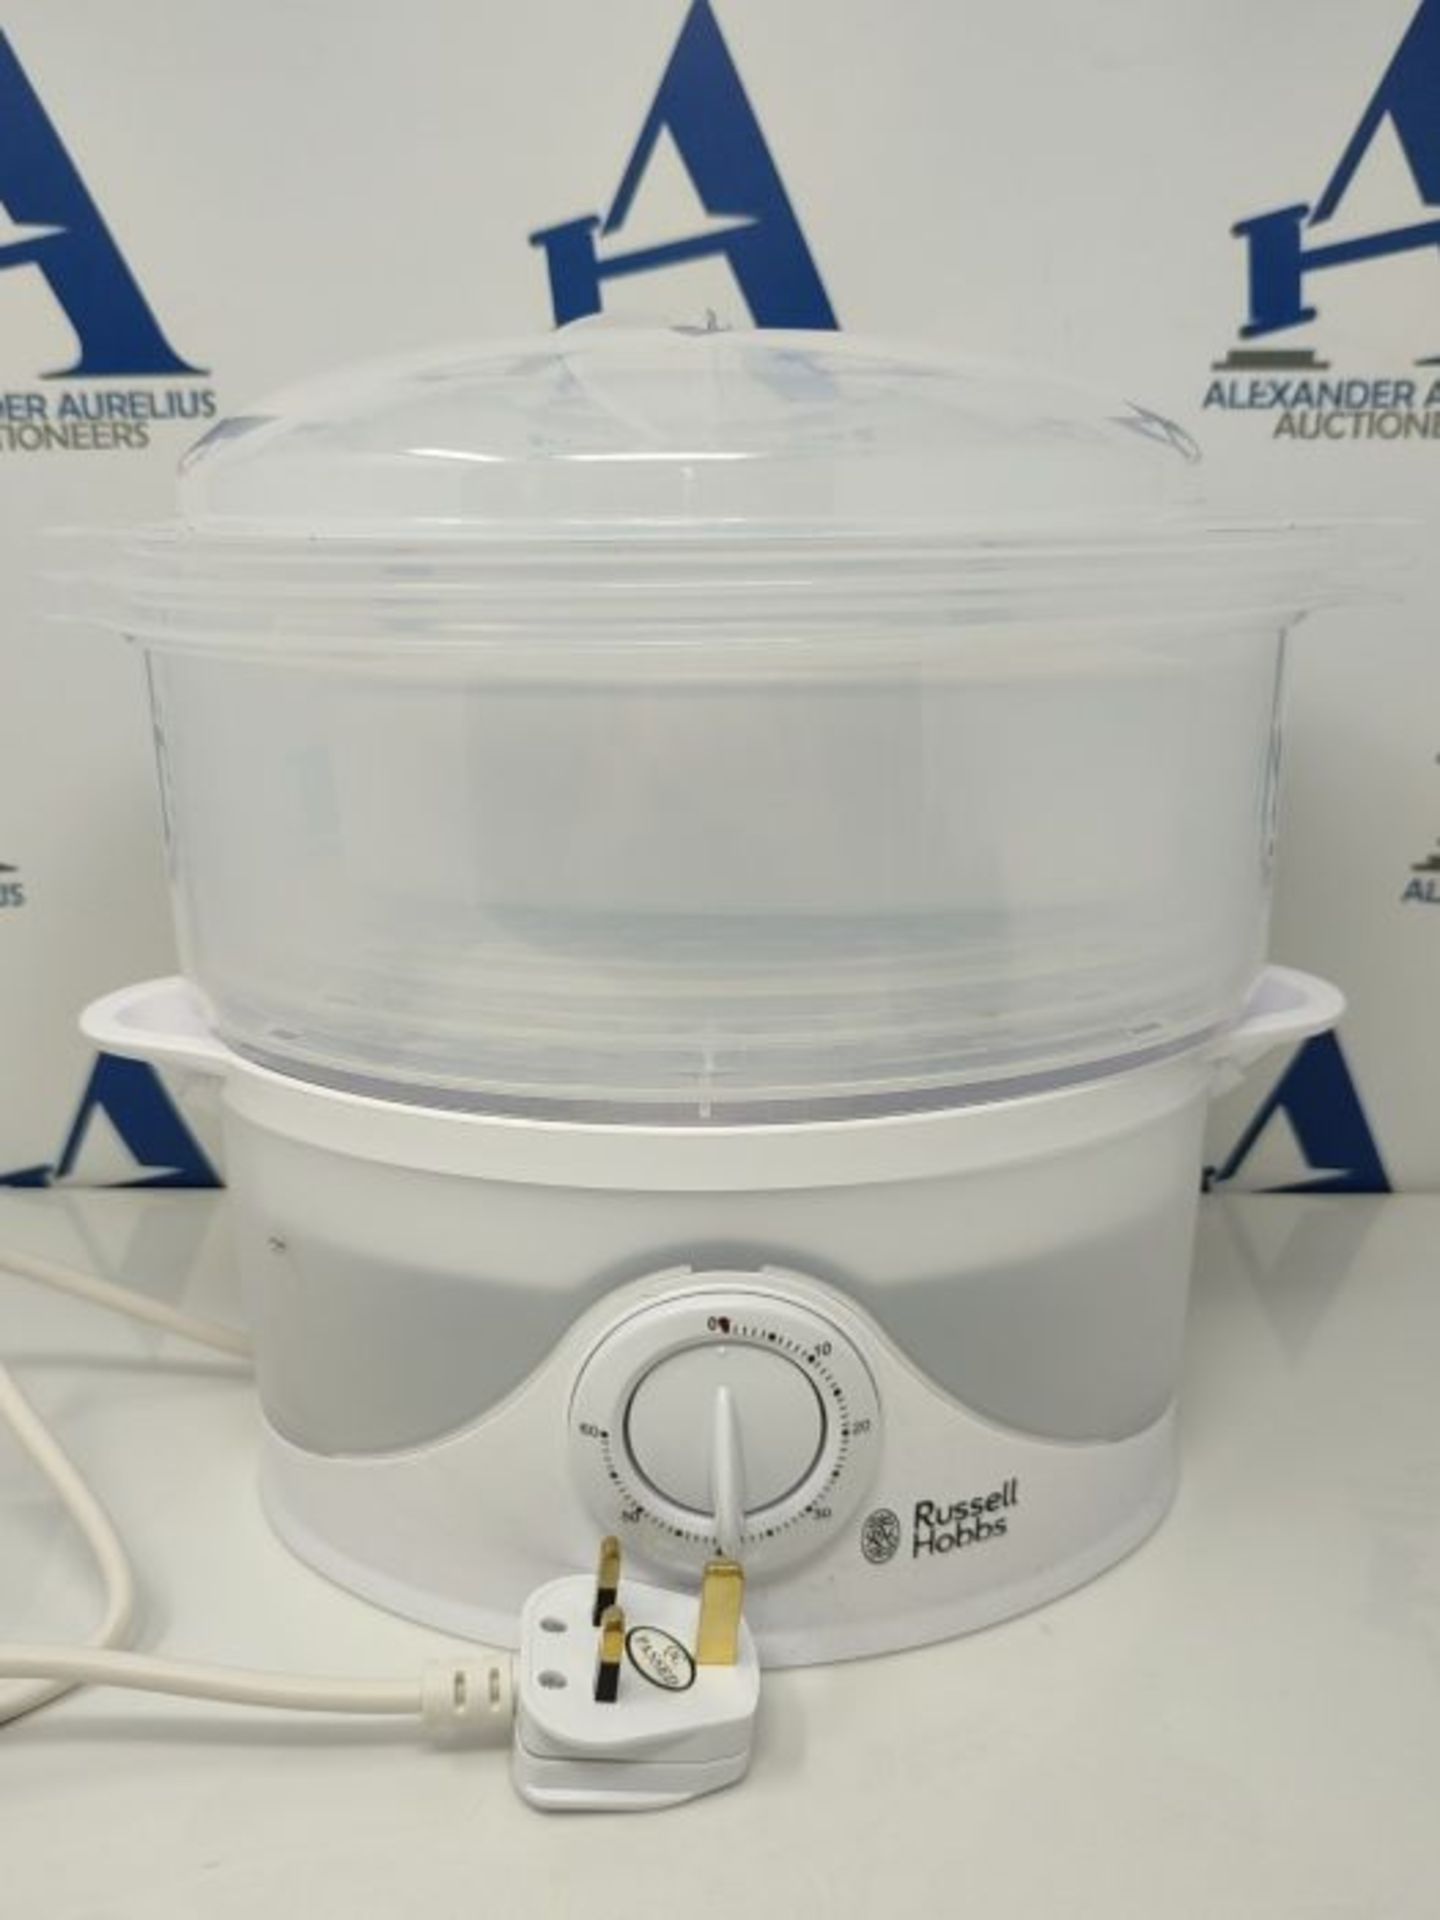 Russell Hobbs 21140 3-Tier Food Steamer, 800 W, 9 Litre, White - Image 3 of 3